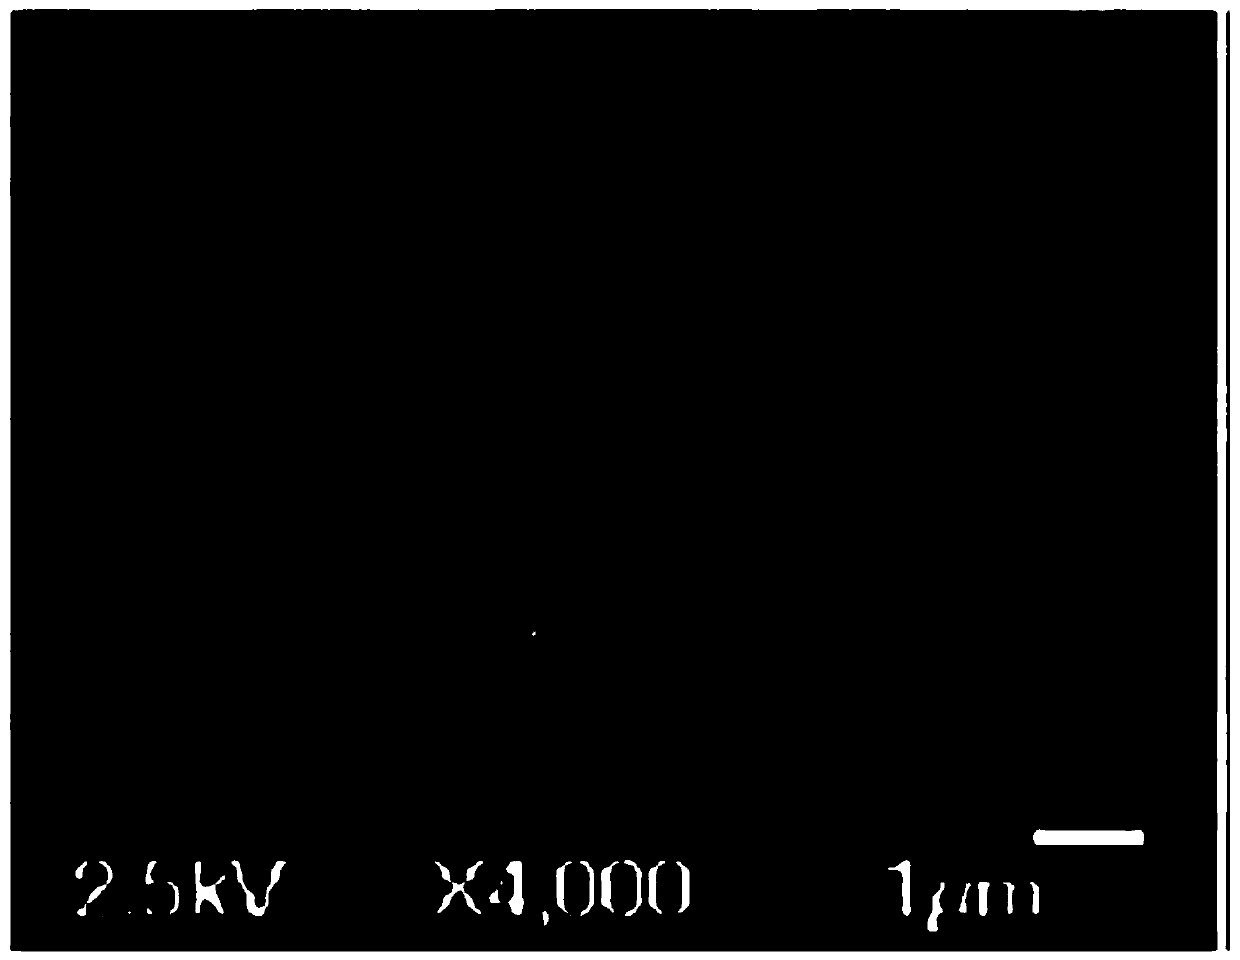 Photosensitive microcapsule containing photochromic material, and preparation method and application thereof